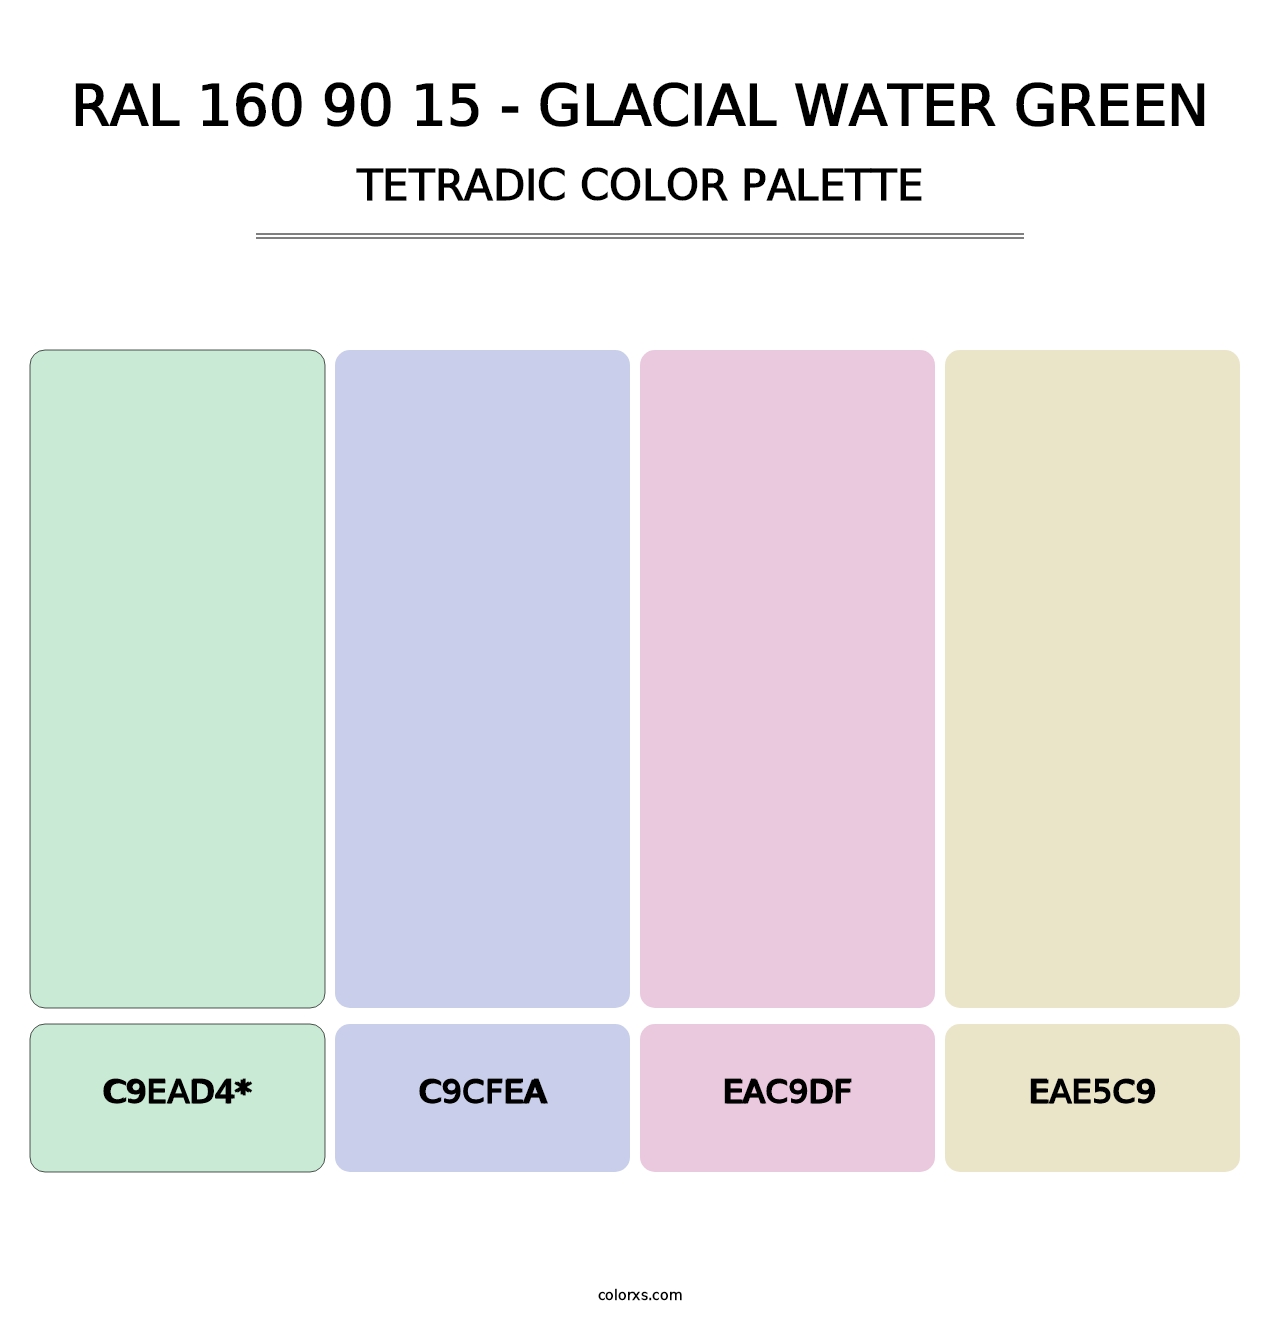 RAL 160 90 15 - Glacial Water Green - Tetradic Color Palette